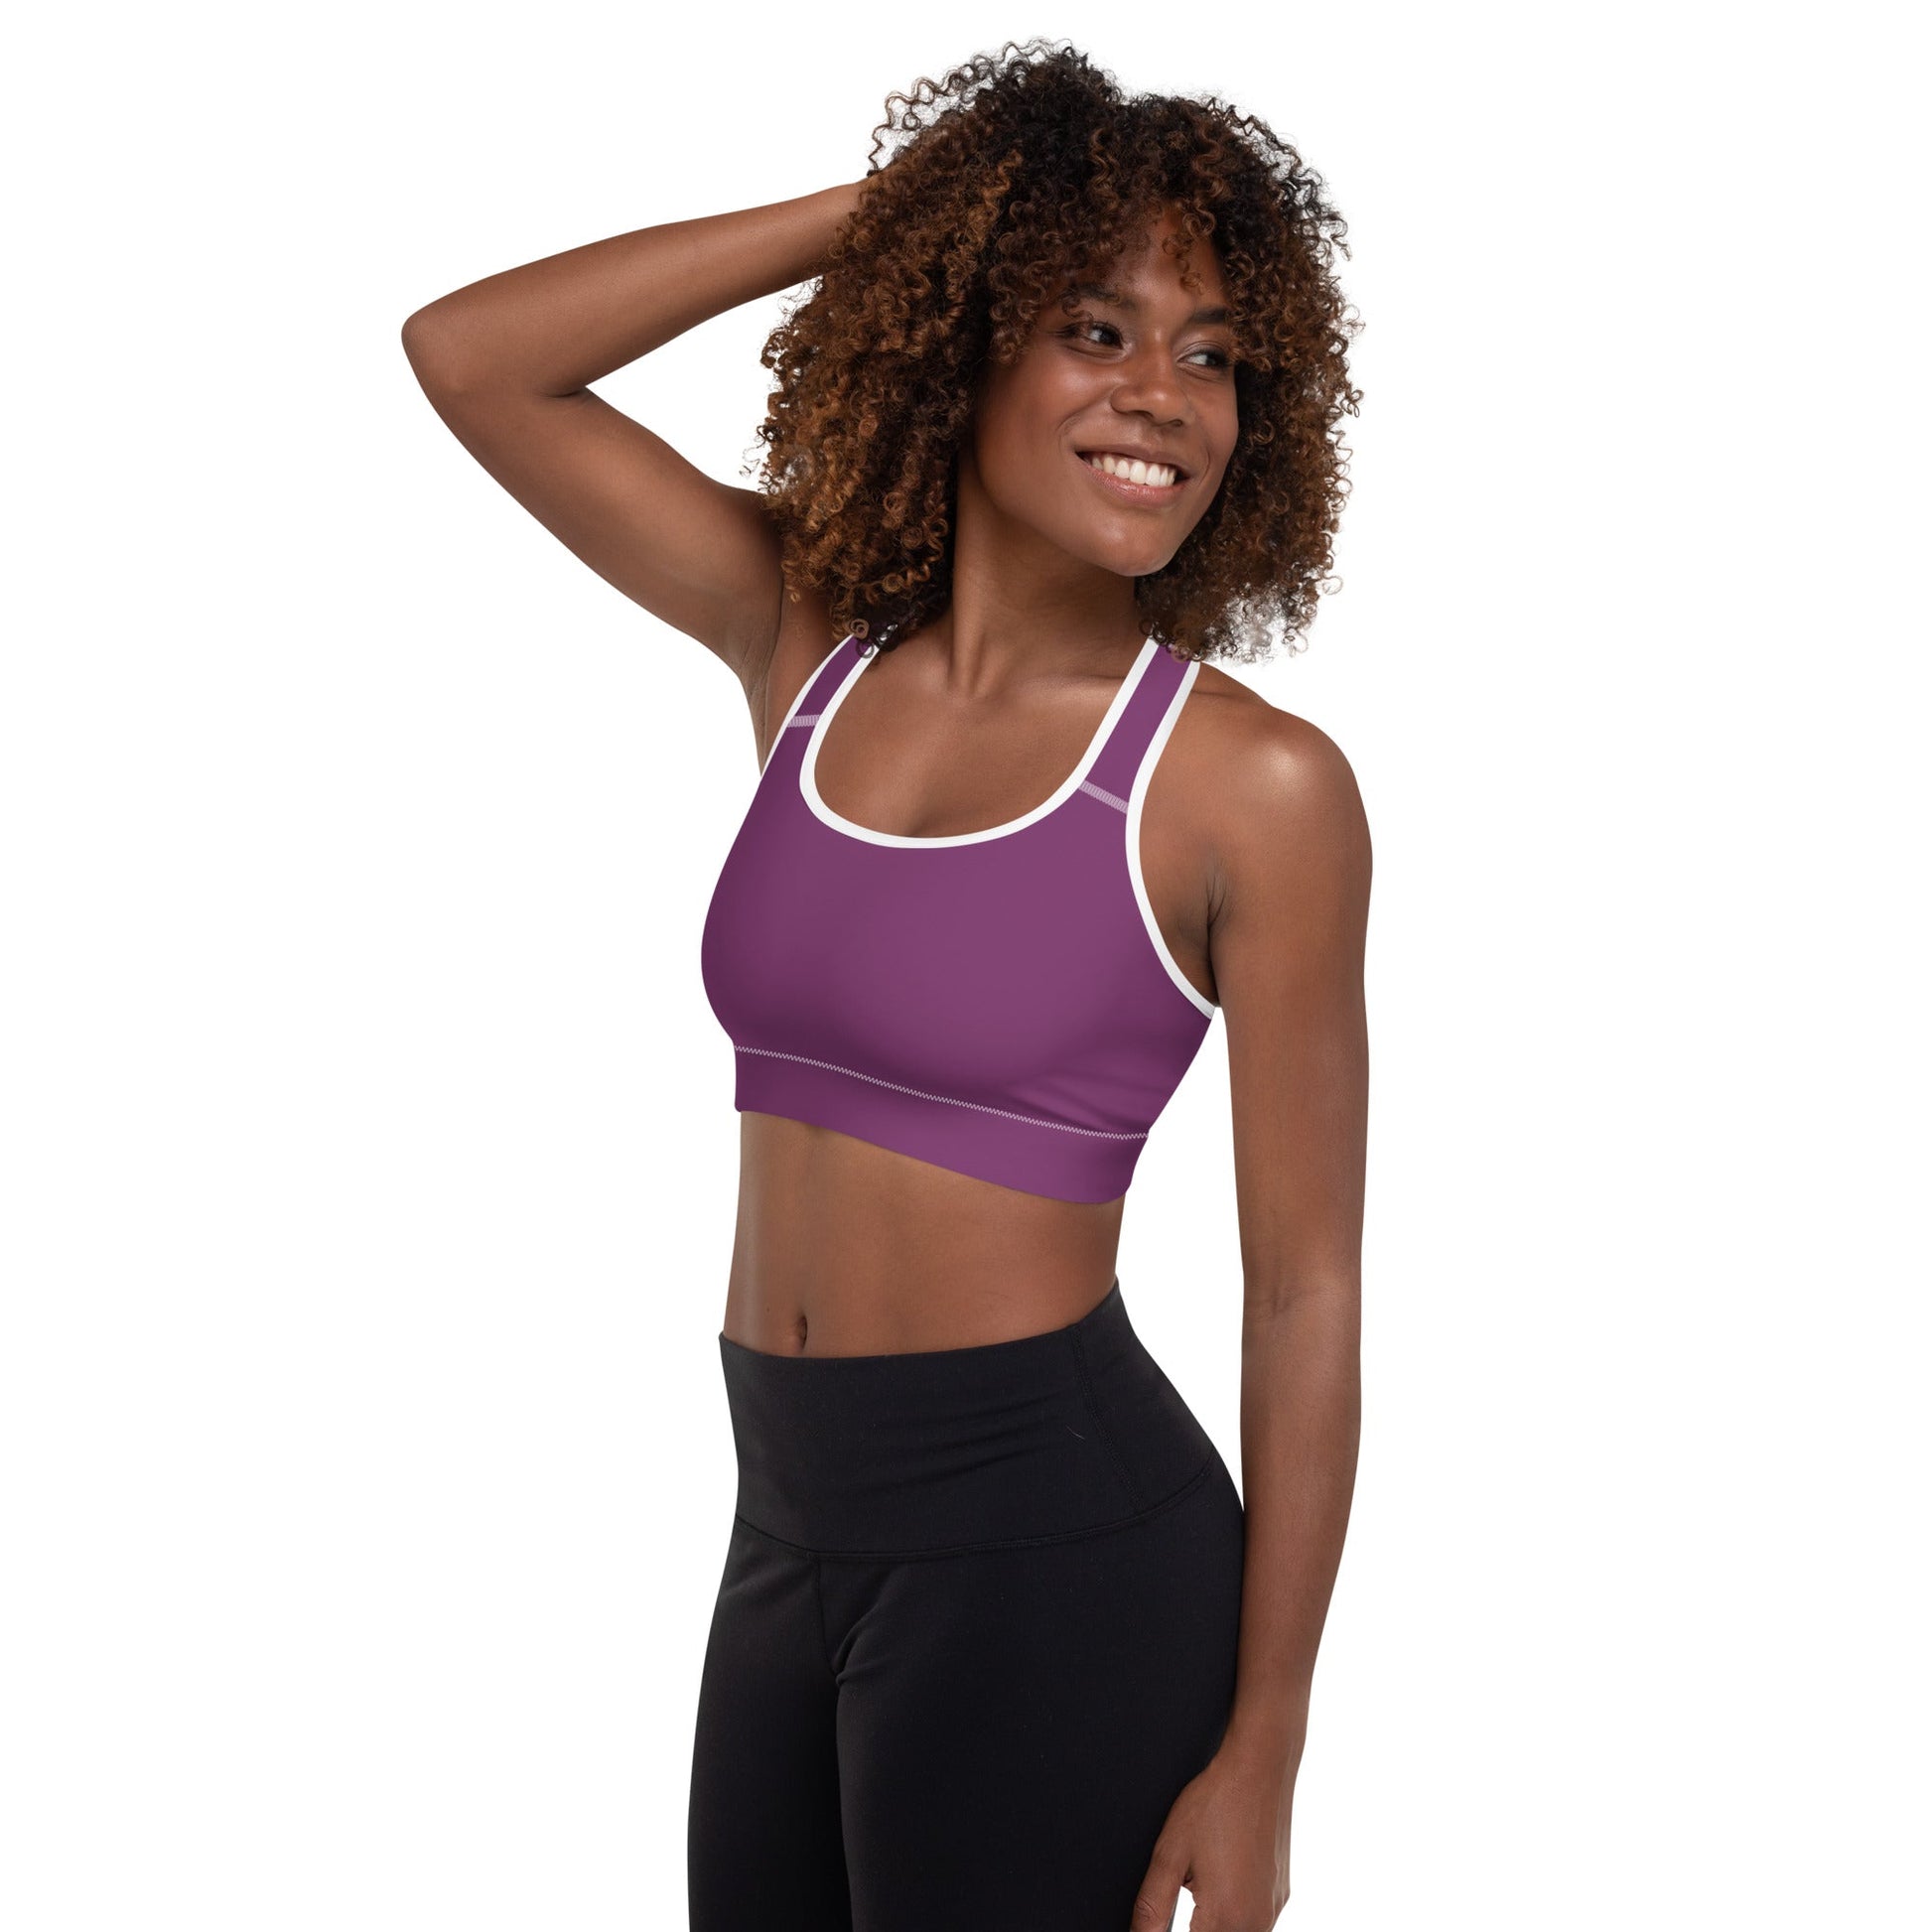 Sleek and Secure Padded Sports Bra - Optimal Support for Every Activity